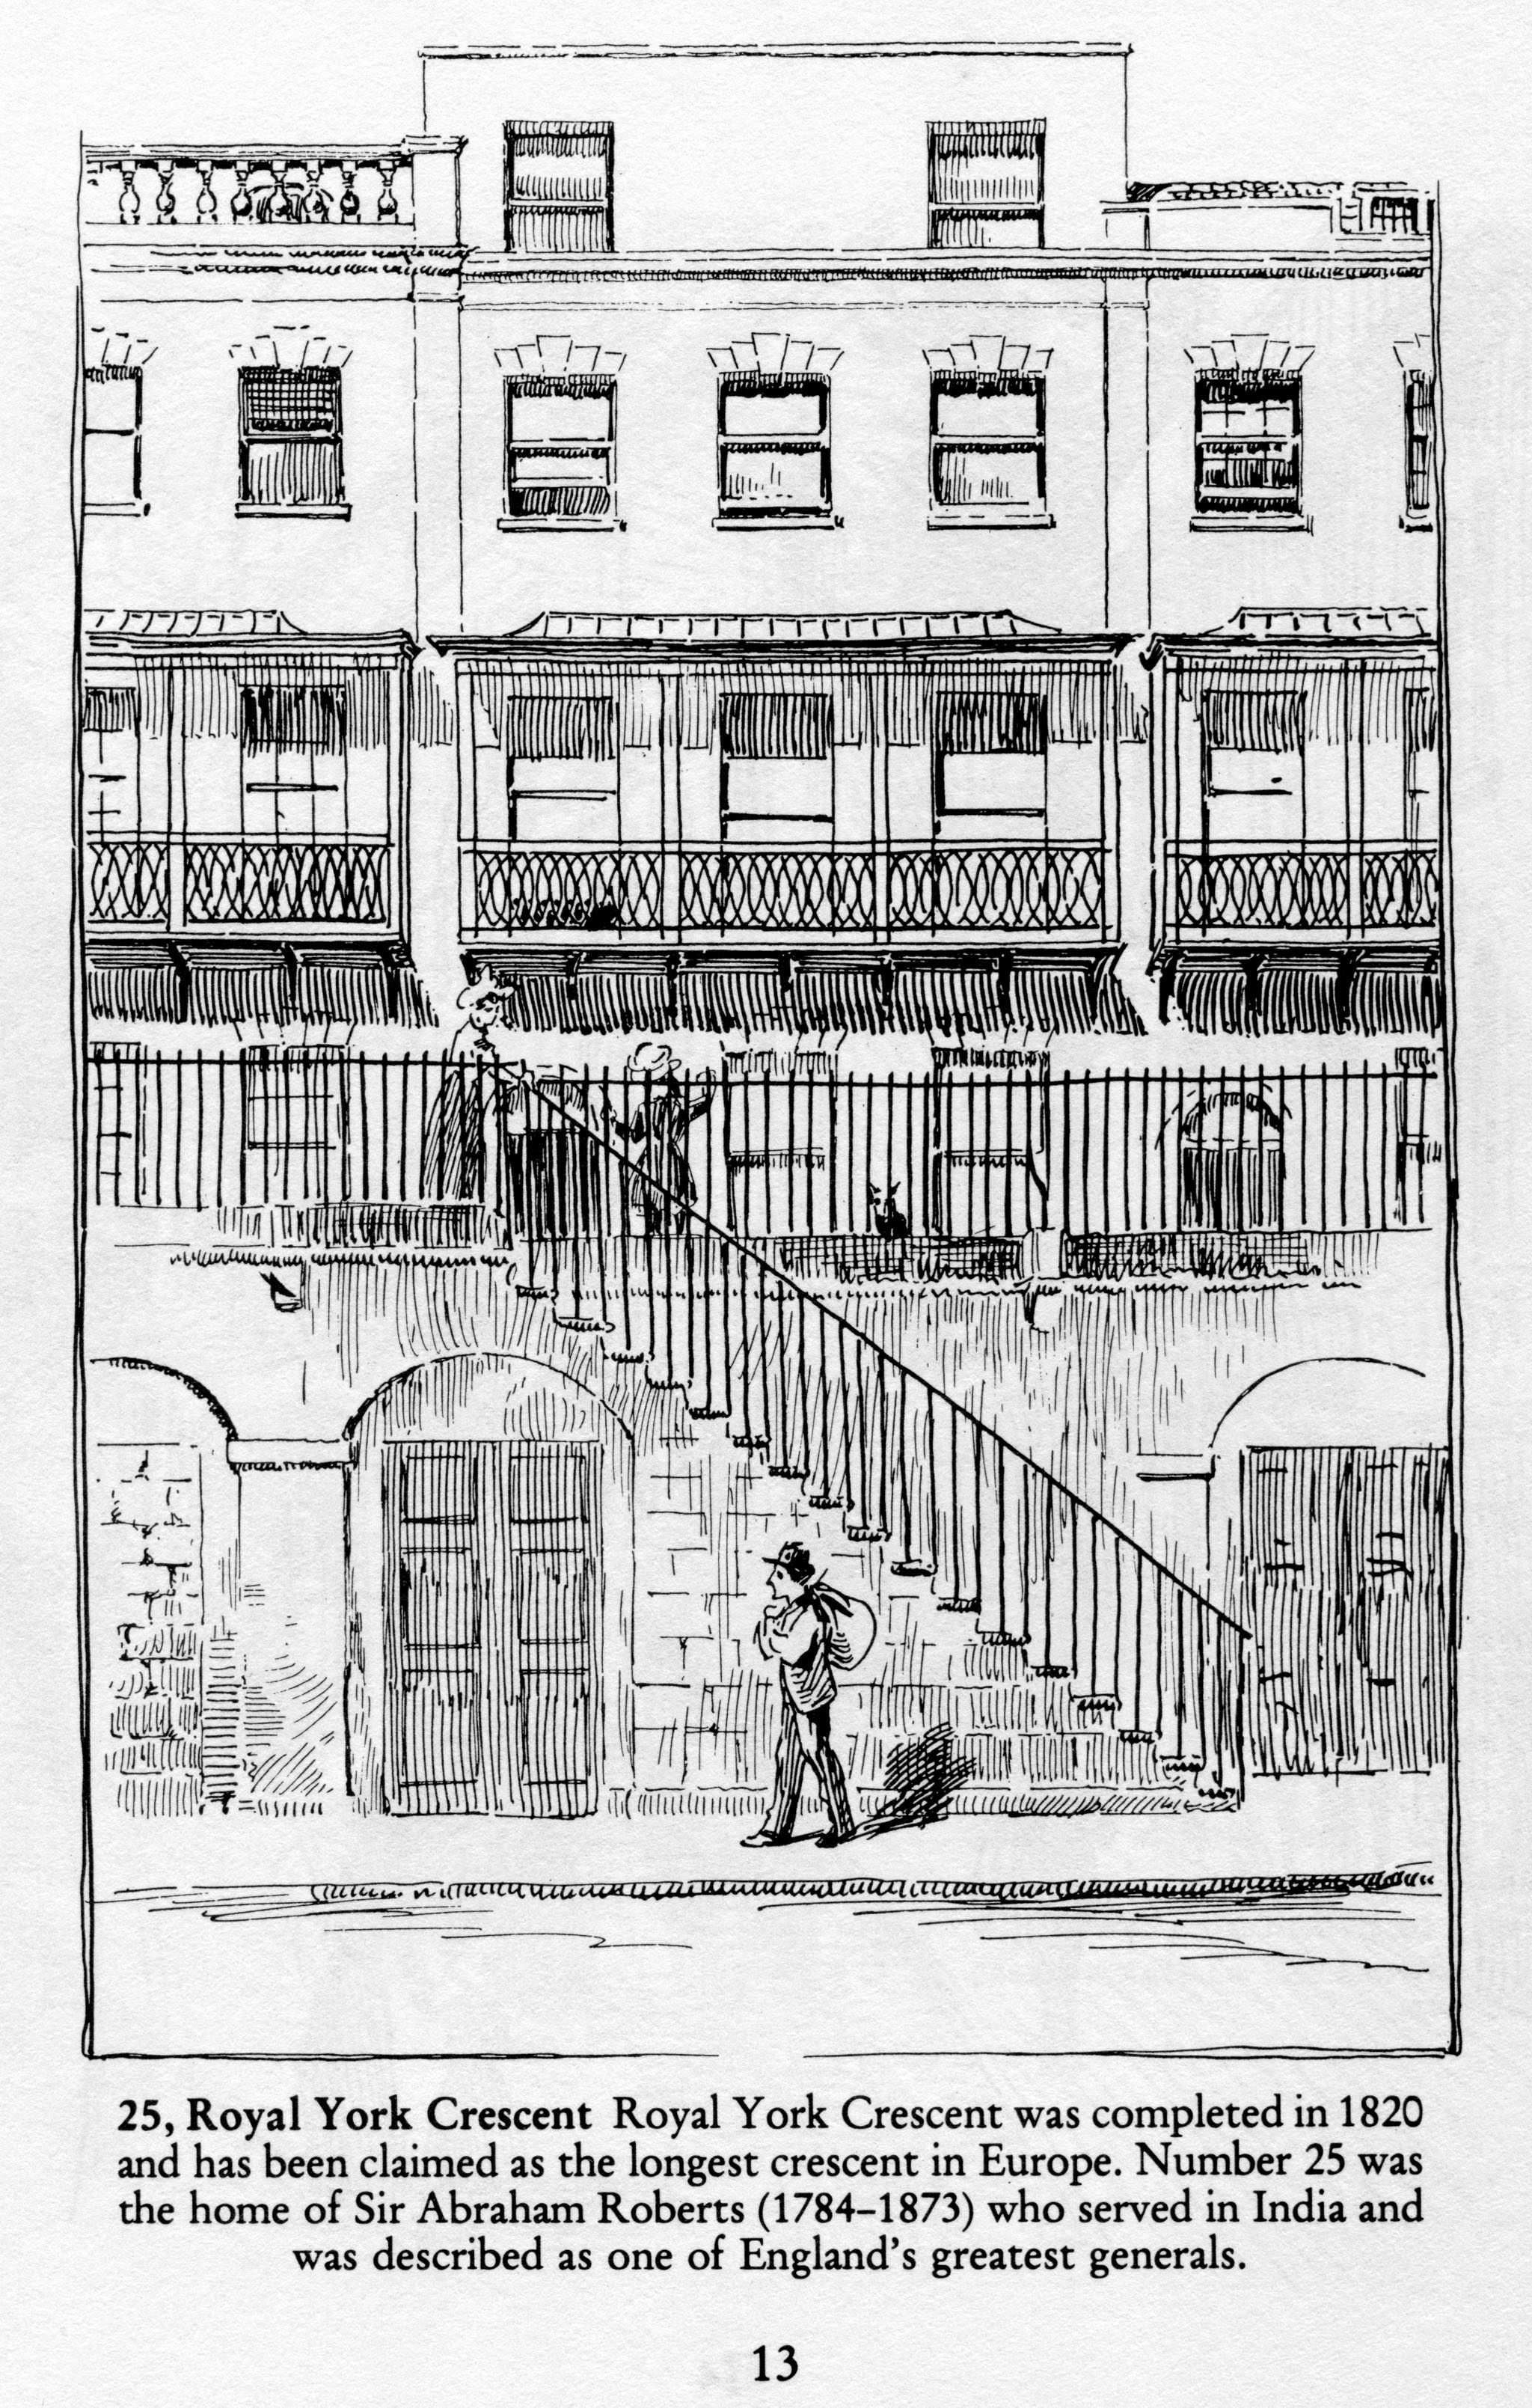 25 Royal York Crescent, by Samuel Loxton
Loxton drawing from Bristol Library collection via Loxton's Bristol, Redcliffe Press, 1995 ISBN 1 872971 86 5.
